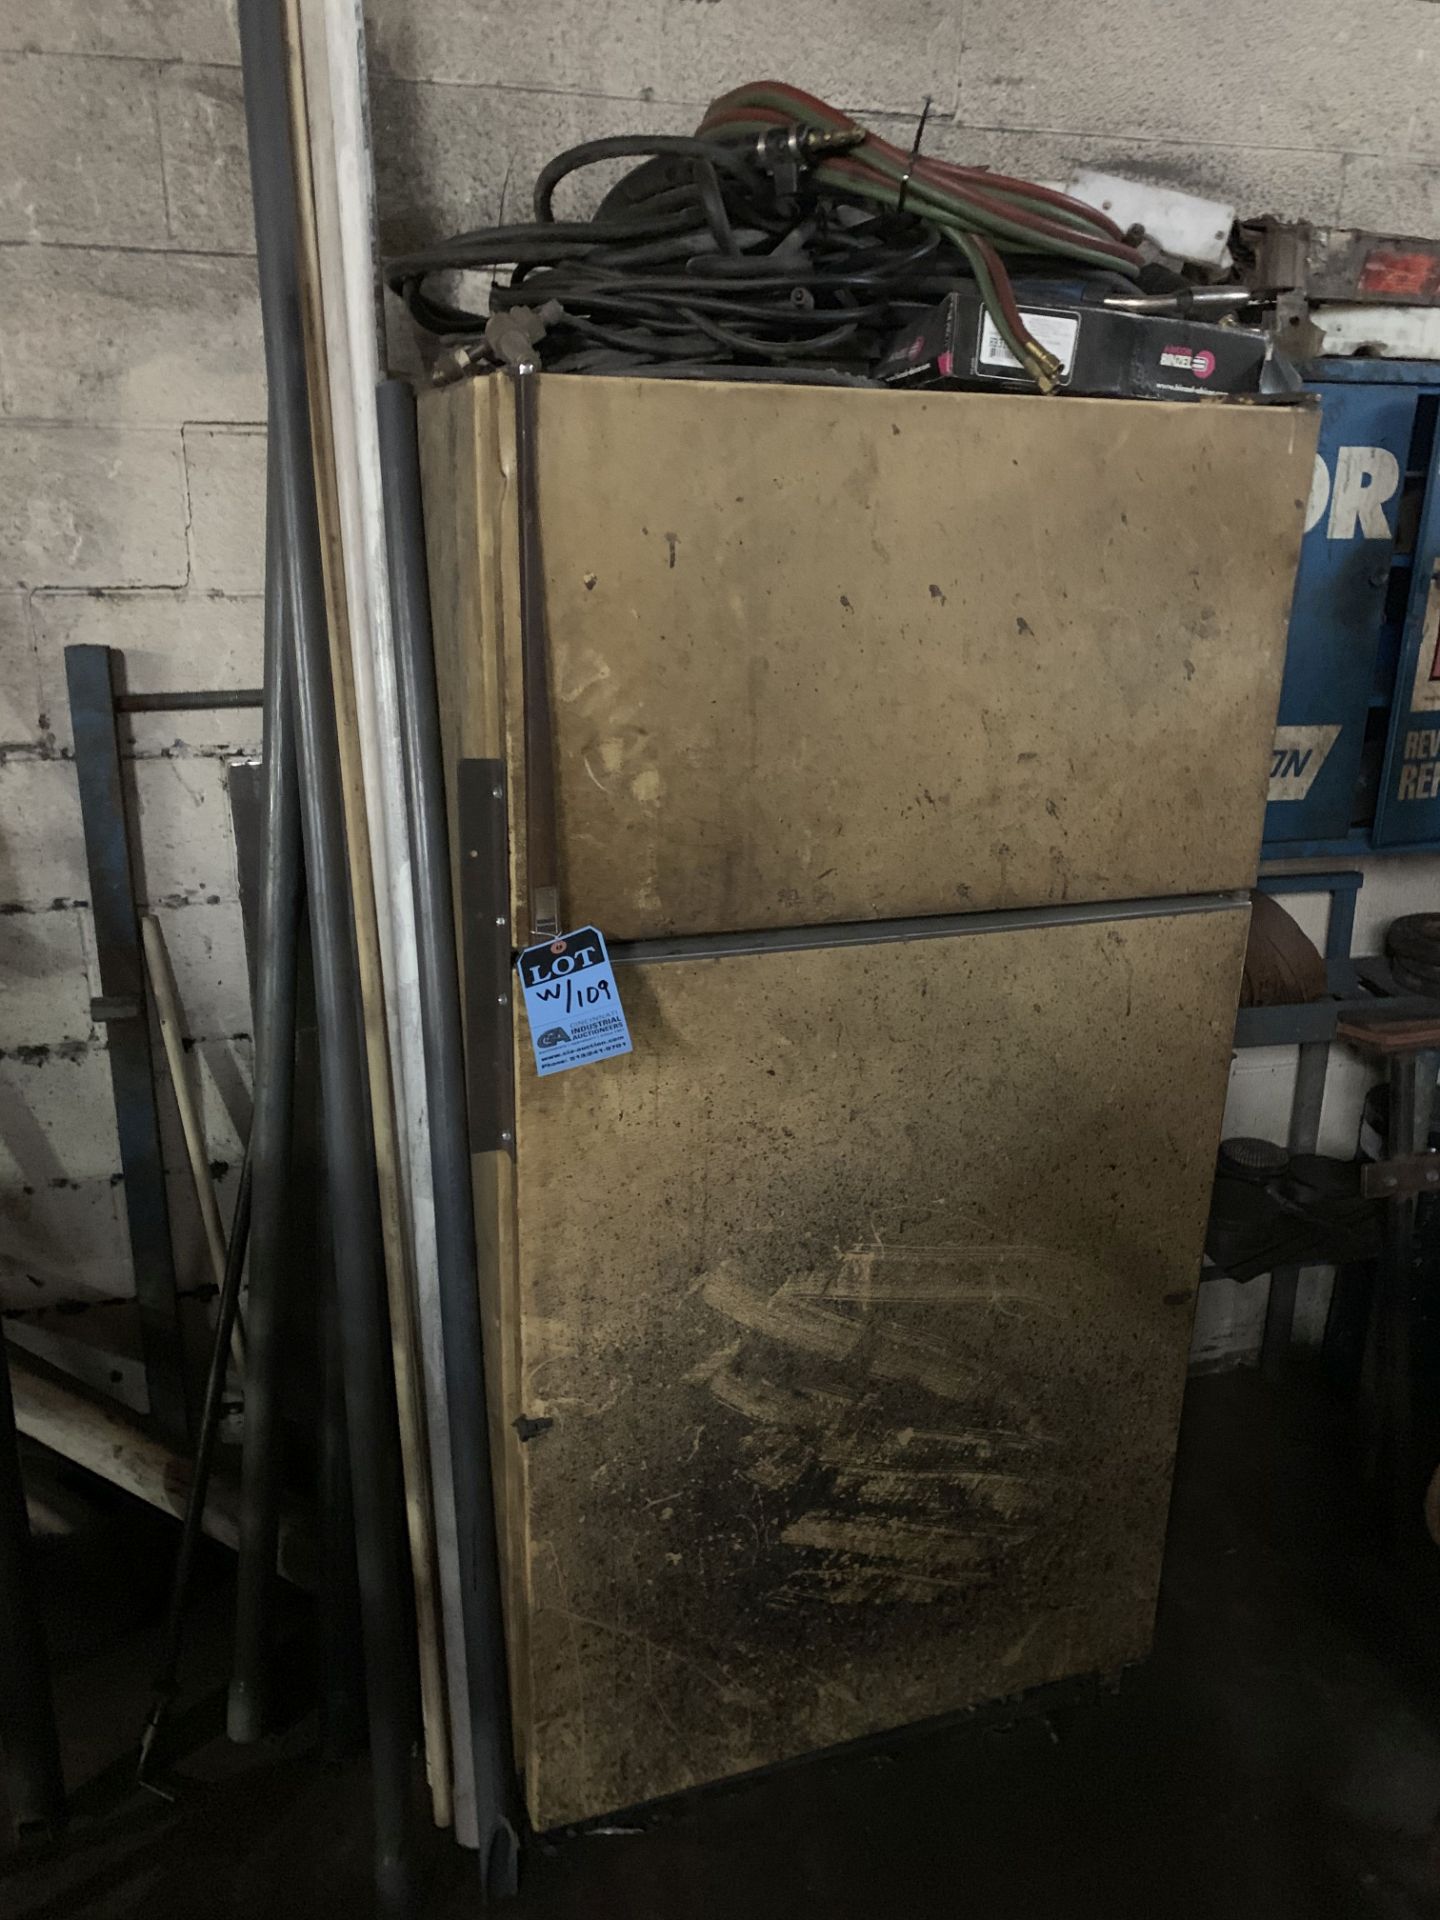 (LOT) REFRIGERATOR WITH WELDING SUPPLIES, 2-DOOR CABINET WITH MAINTENANCE ITEMS, AND RED CABINET - Image 2 of 3